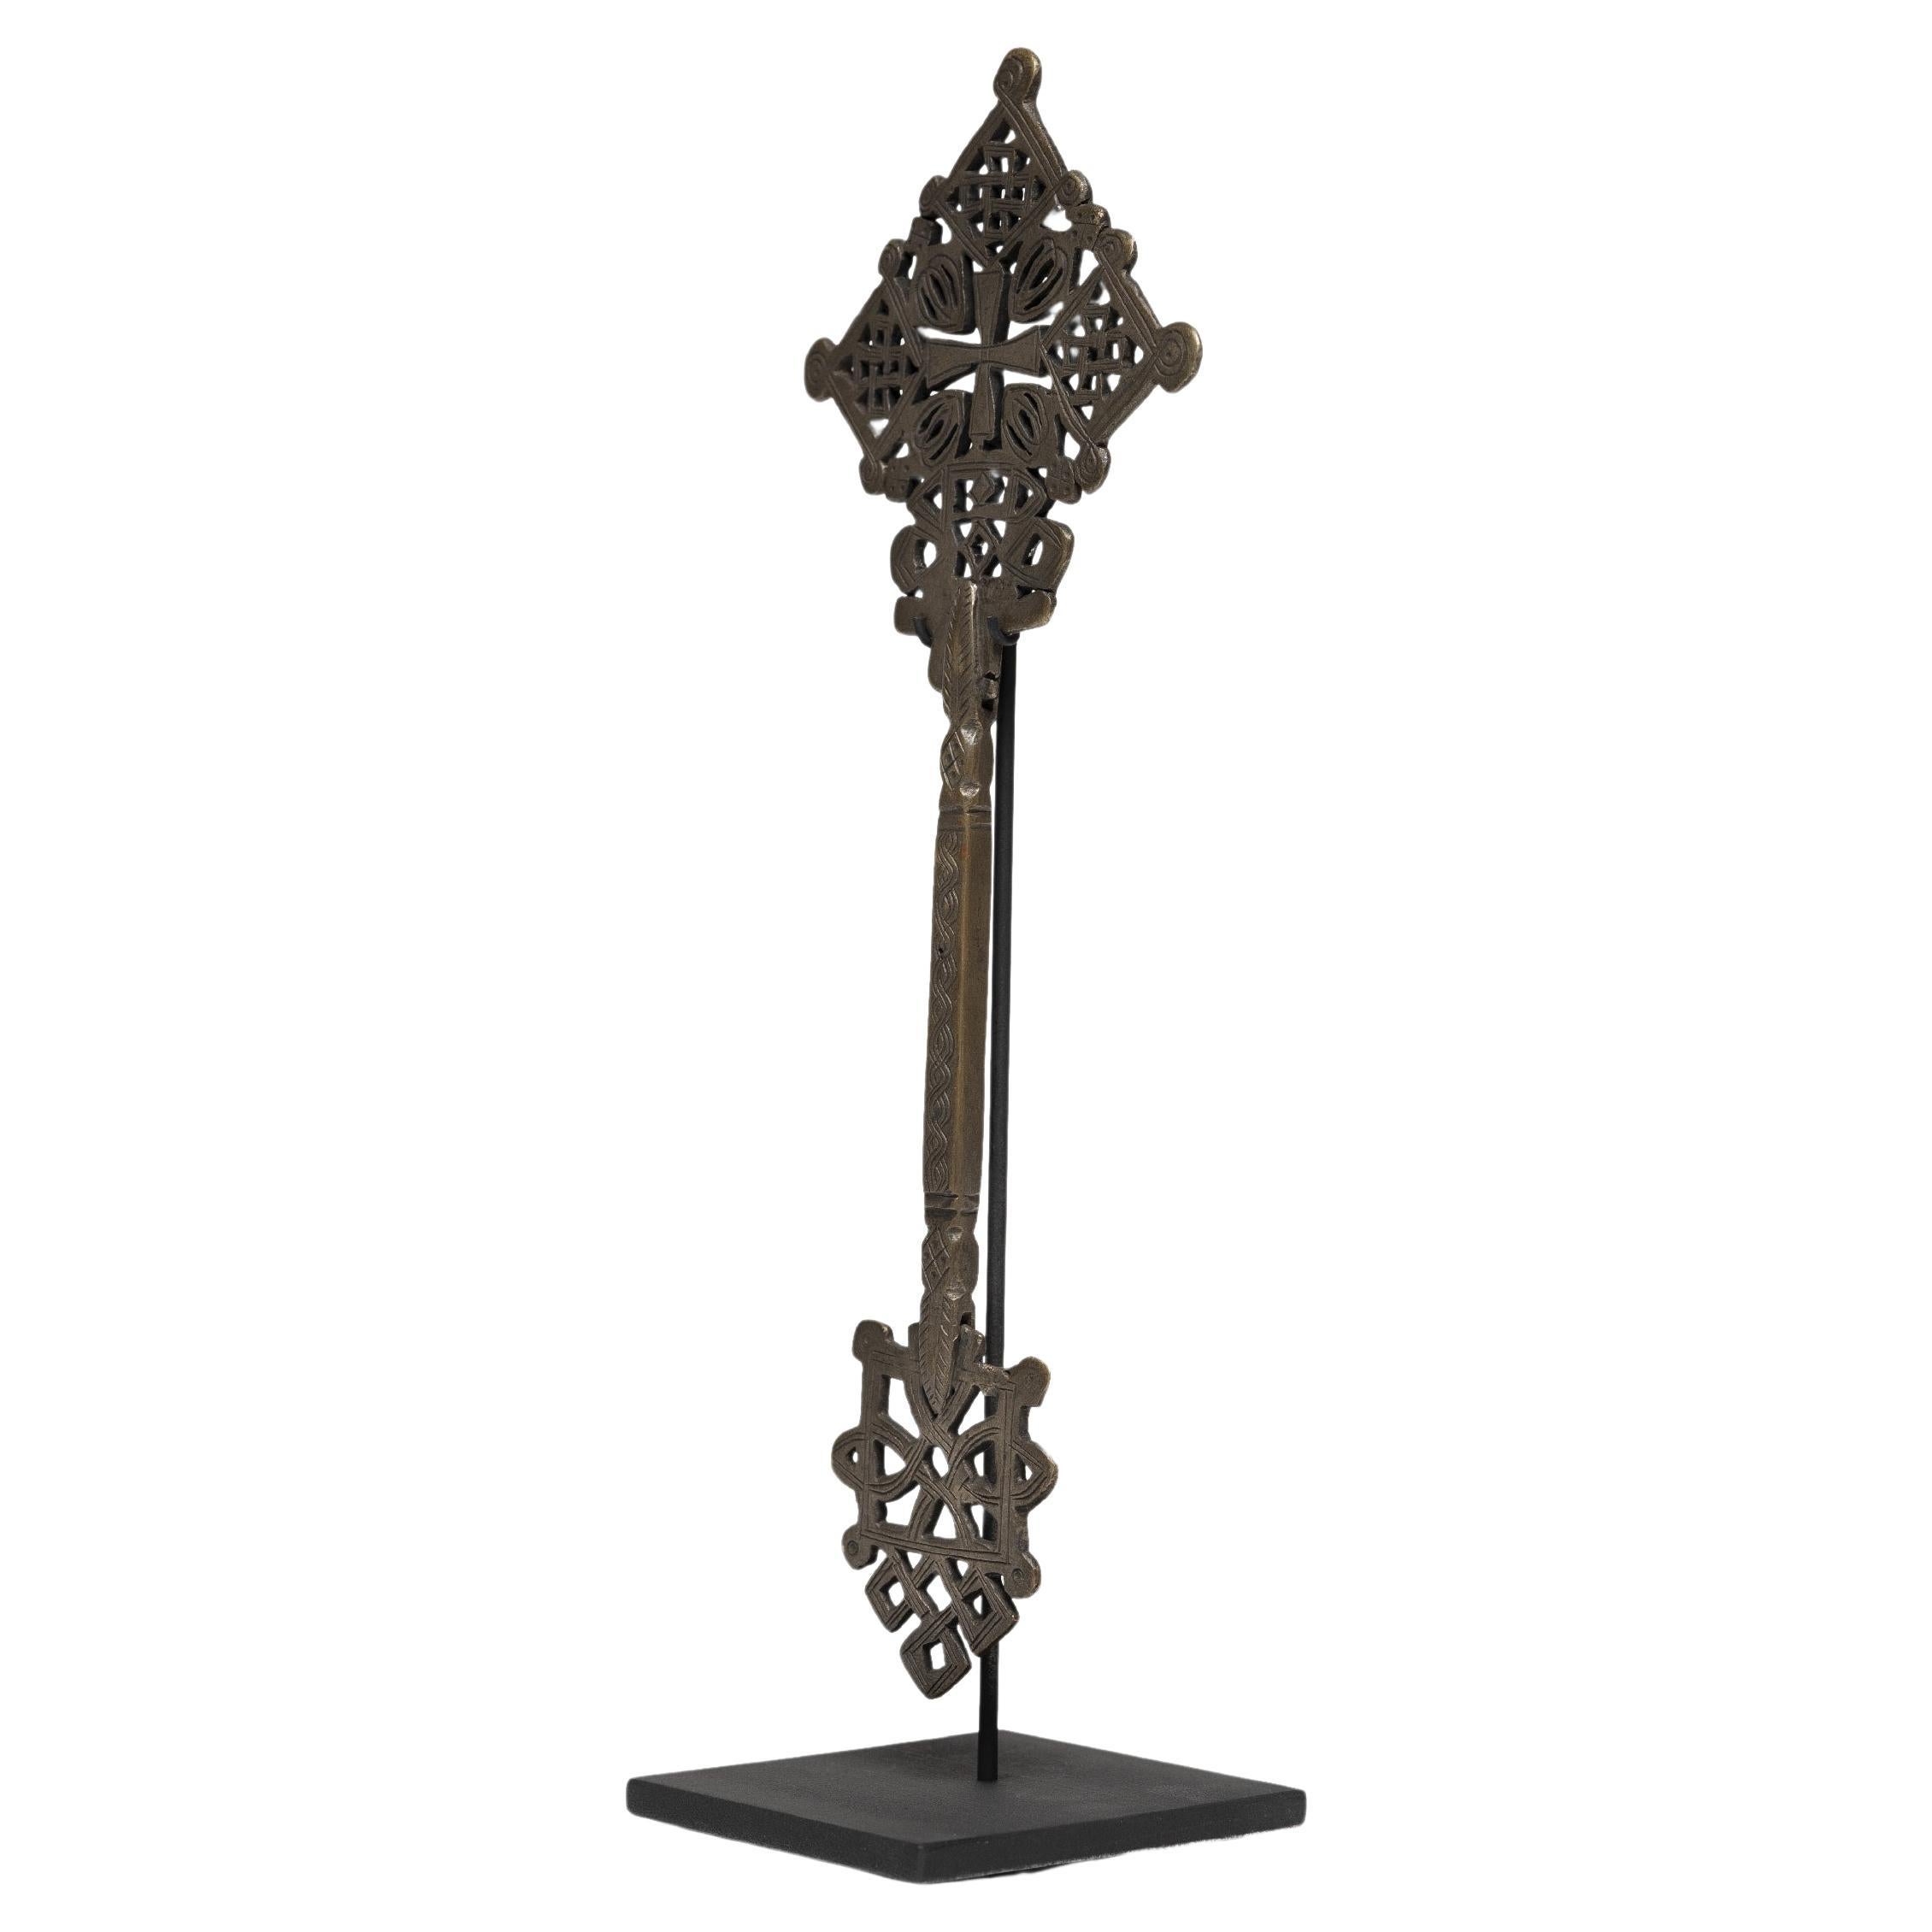 This intricate Ethiopian bronze cross exemplifies a style unique to the region's Coptic subset of the Christian faith. The exquisitely detailed perforated form is connected by a long etched handle, used primarily by priests. Integral to religious